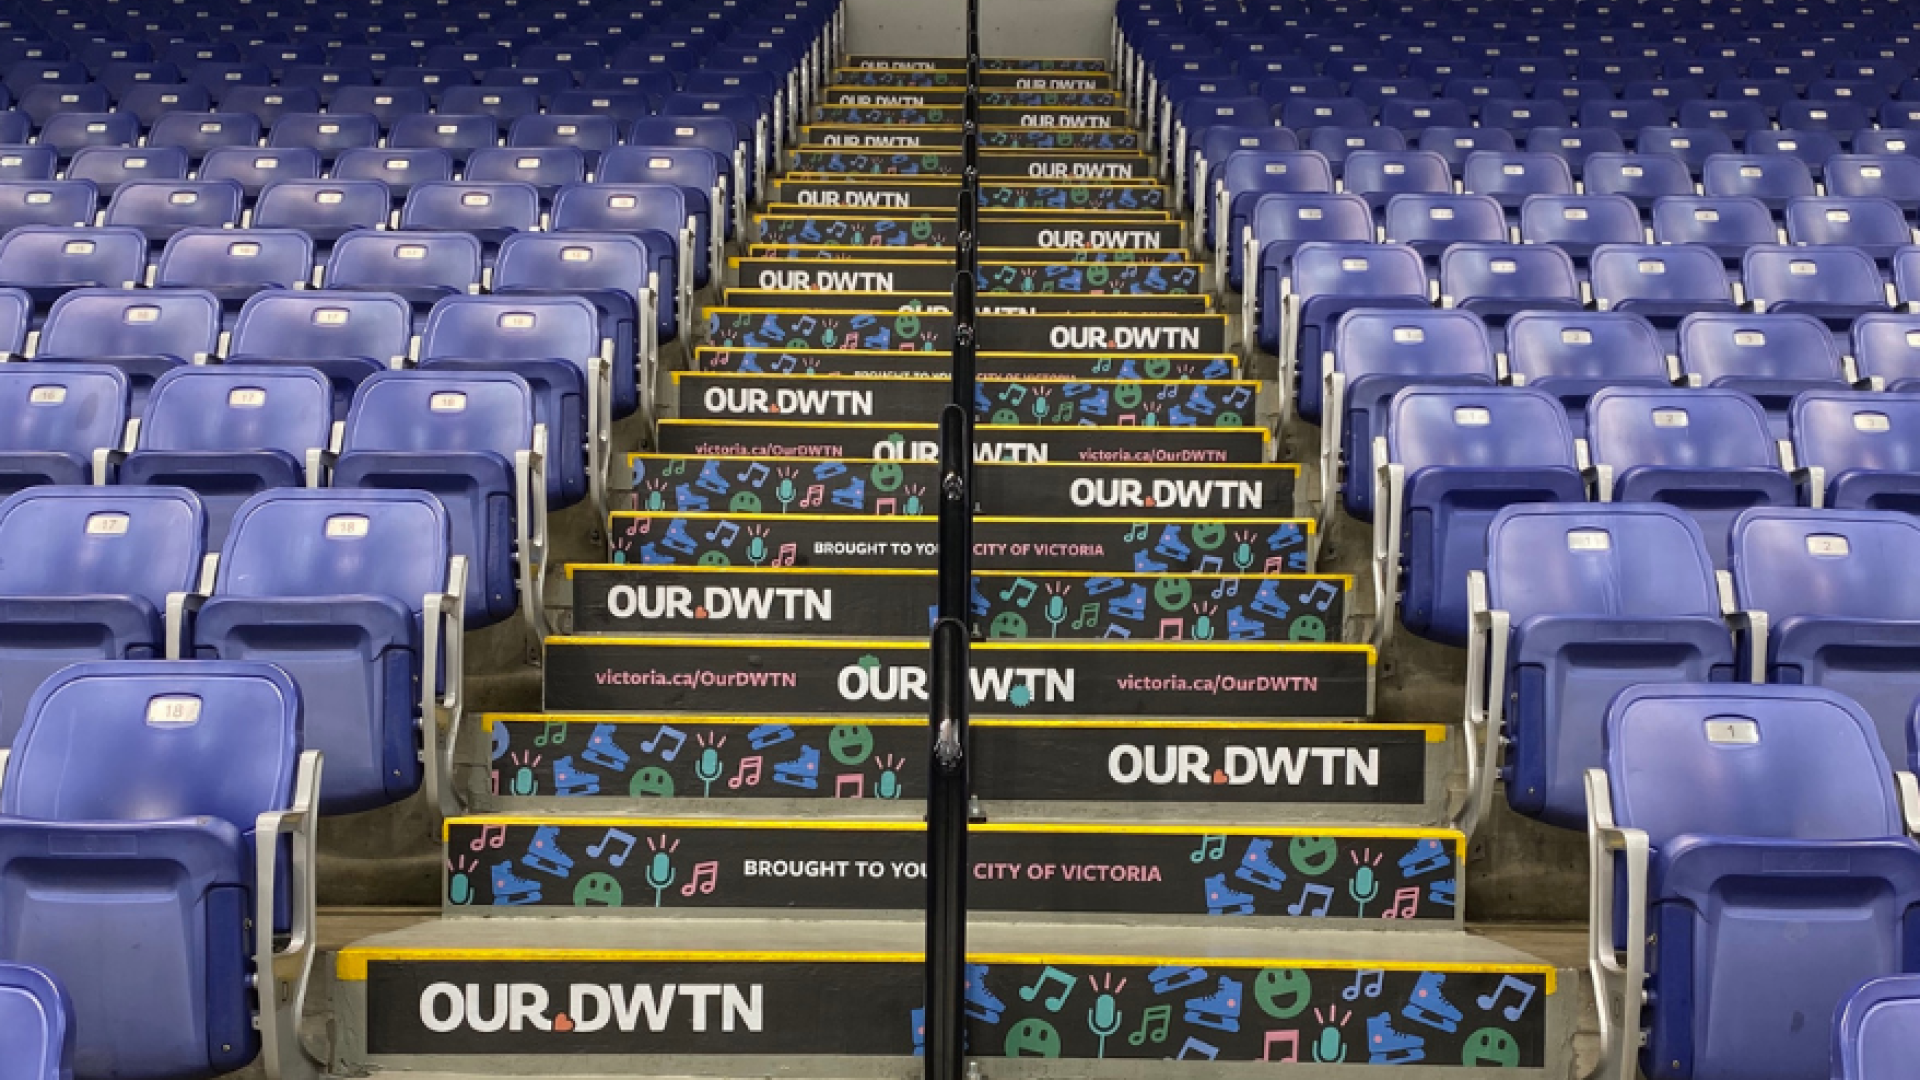 OUR DWTN branding on set of stairs inside the Save-On Foods Memorial Centre